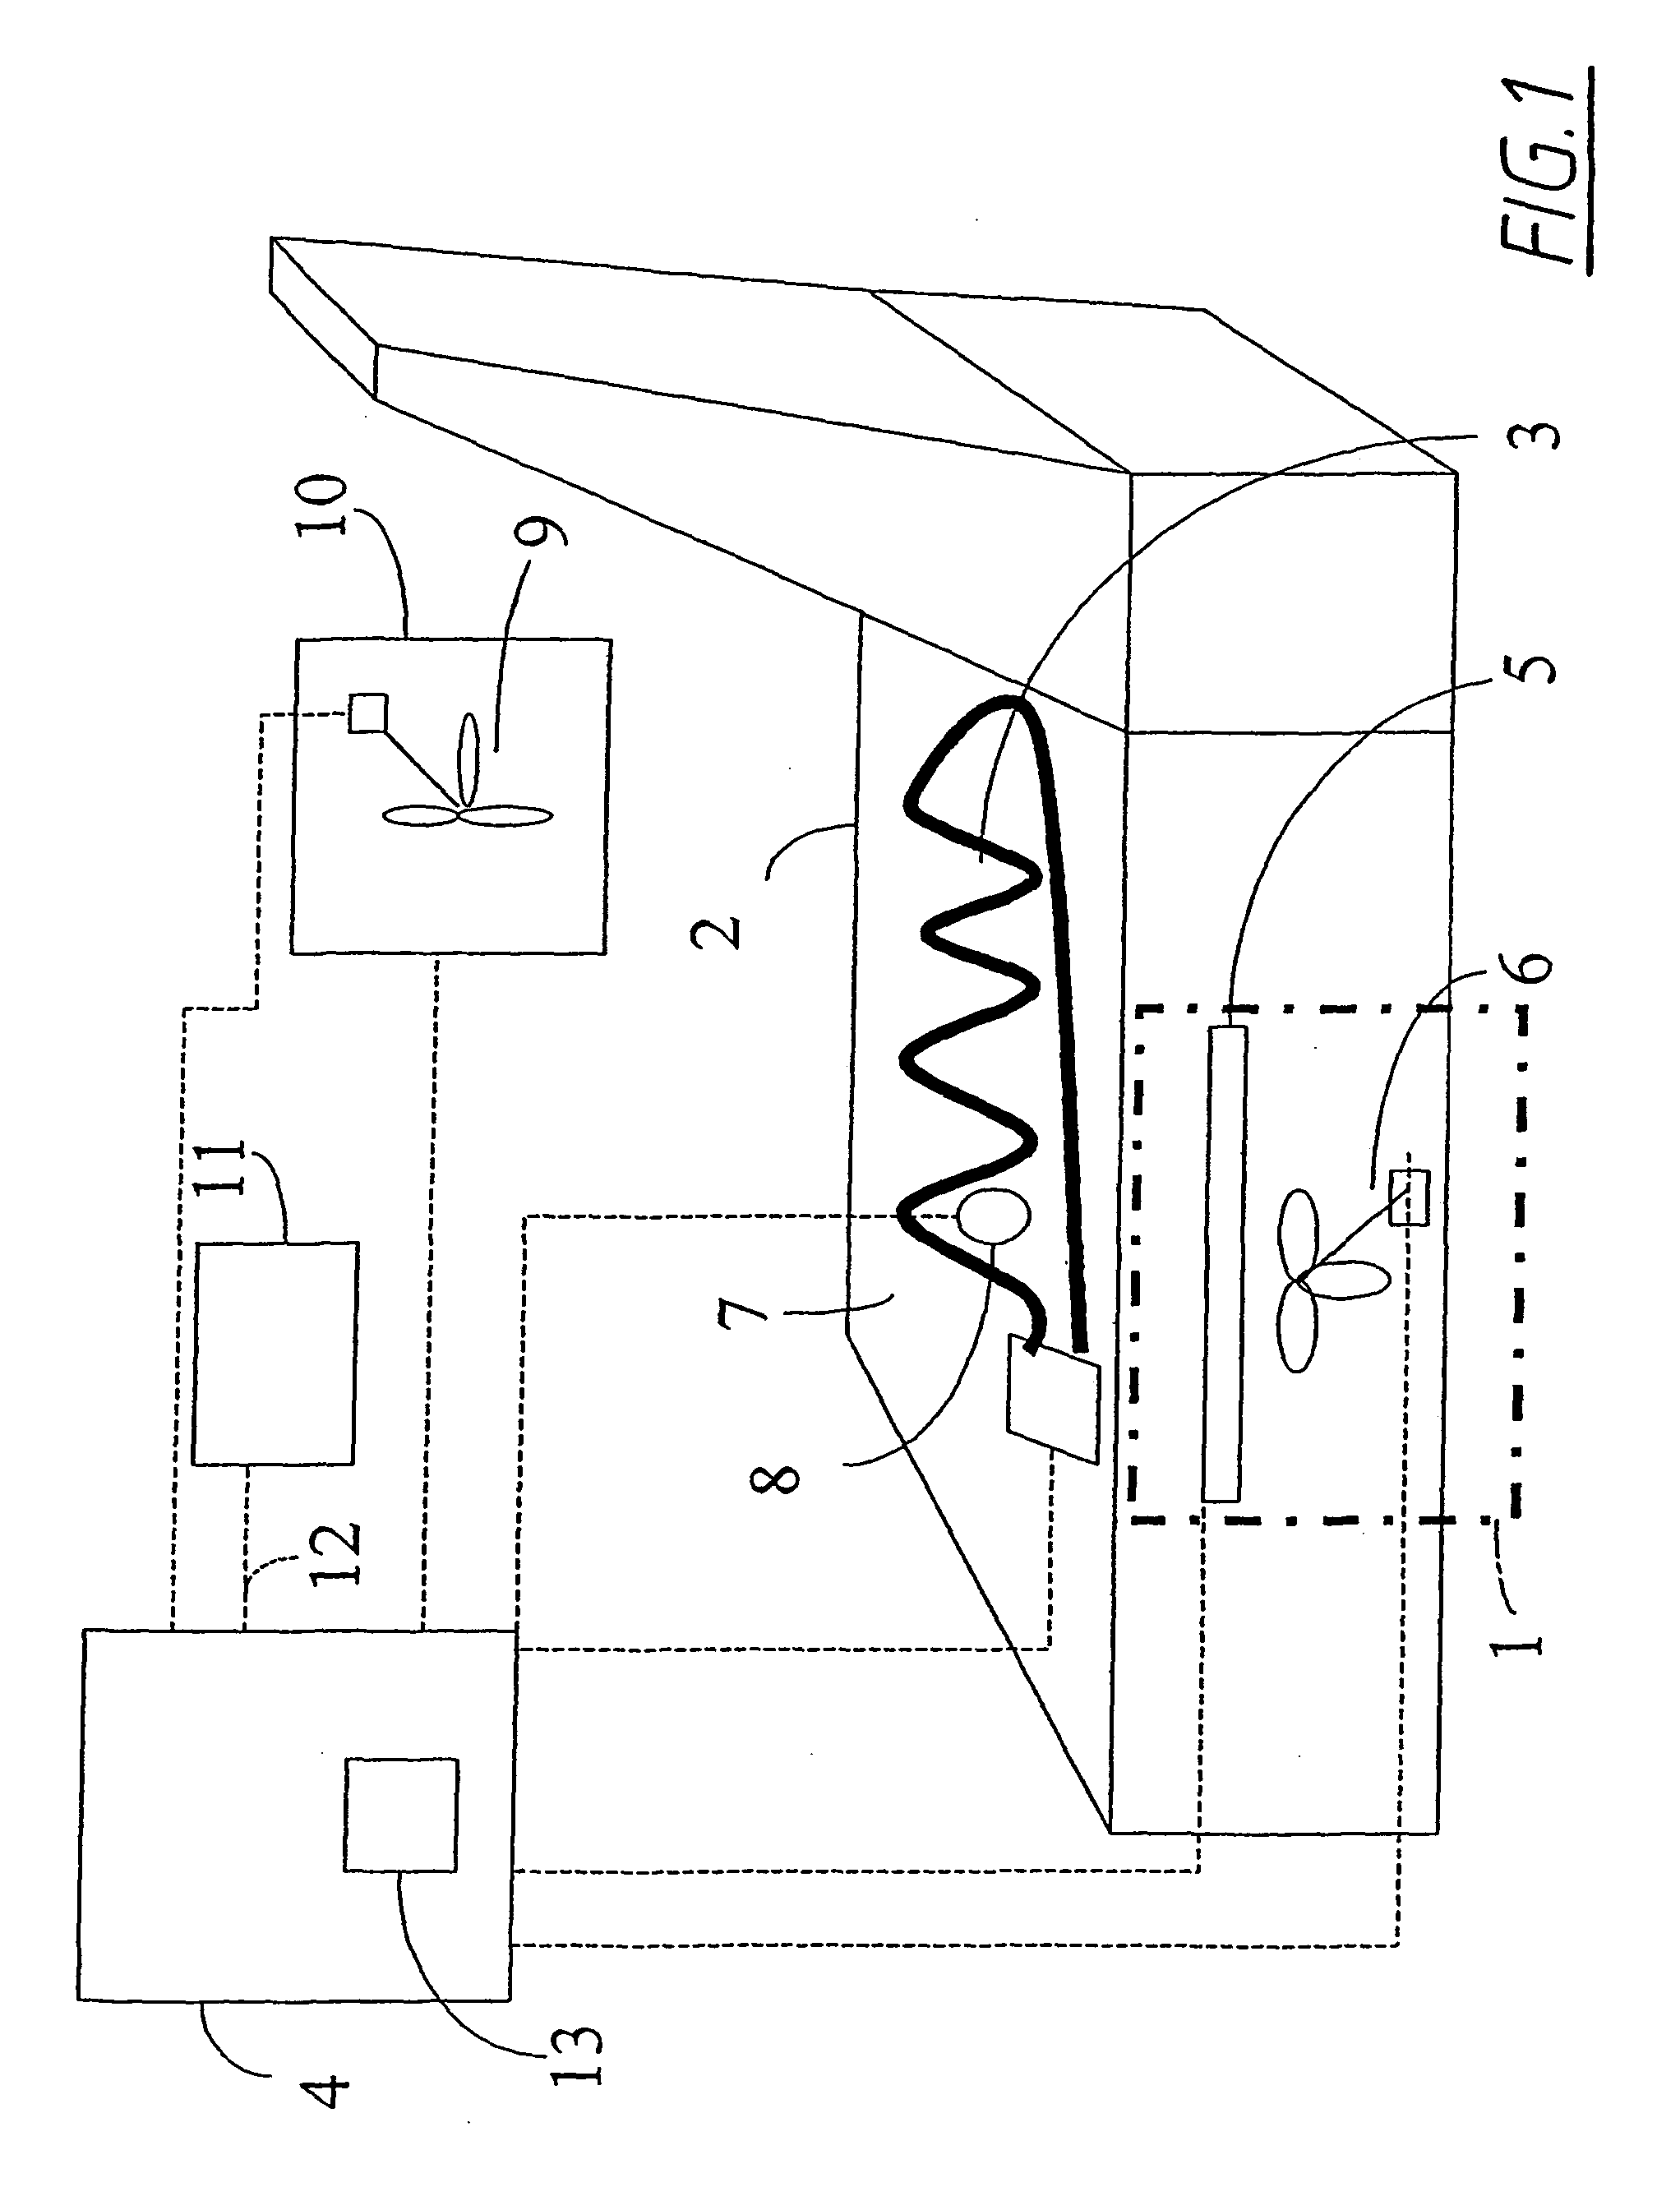 Seat with temparature control and ventilation and safety system for a vehicle